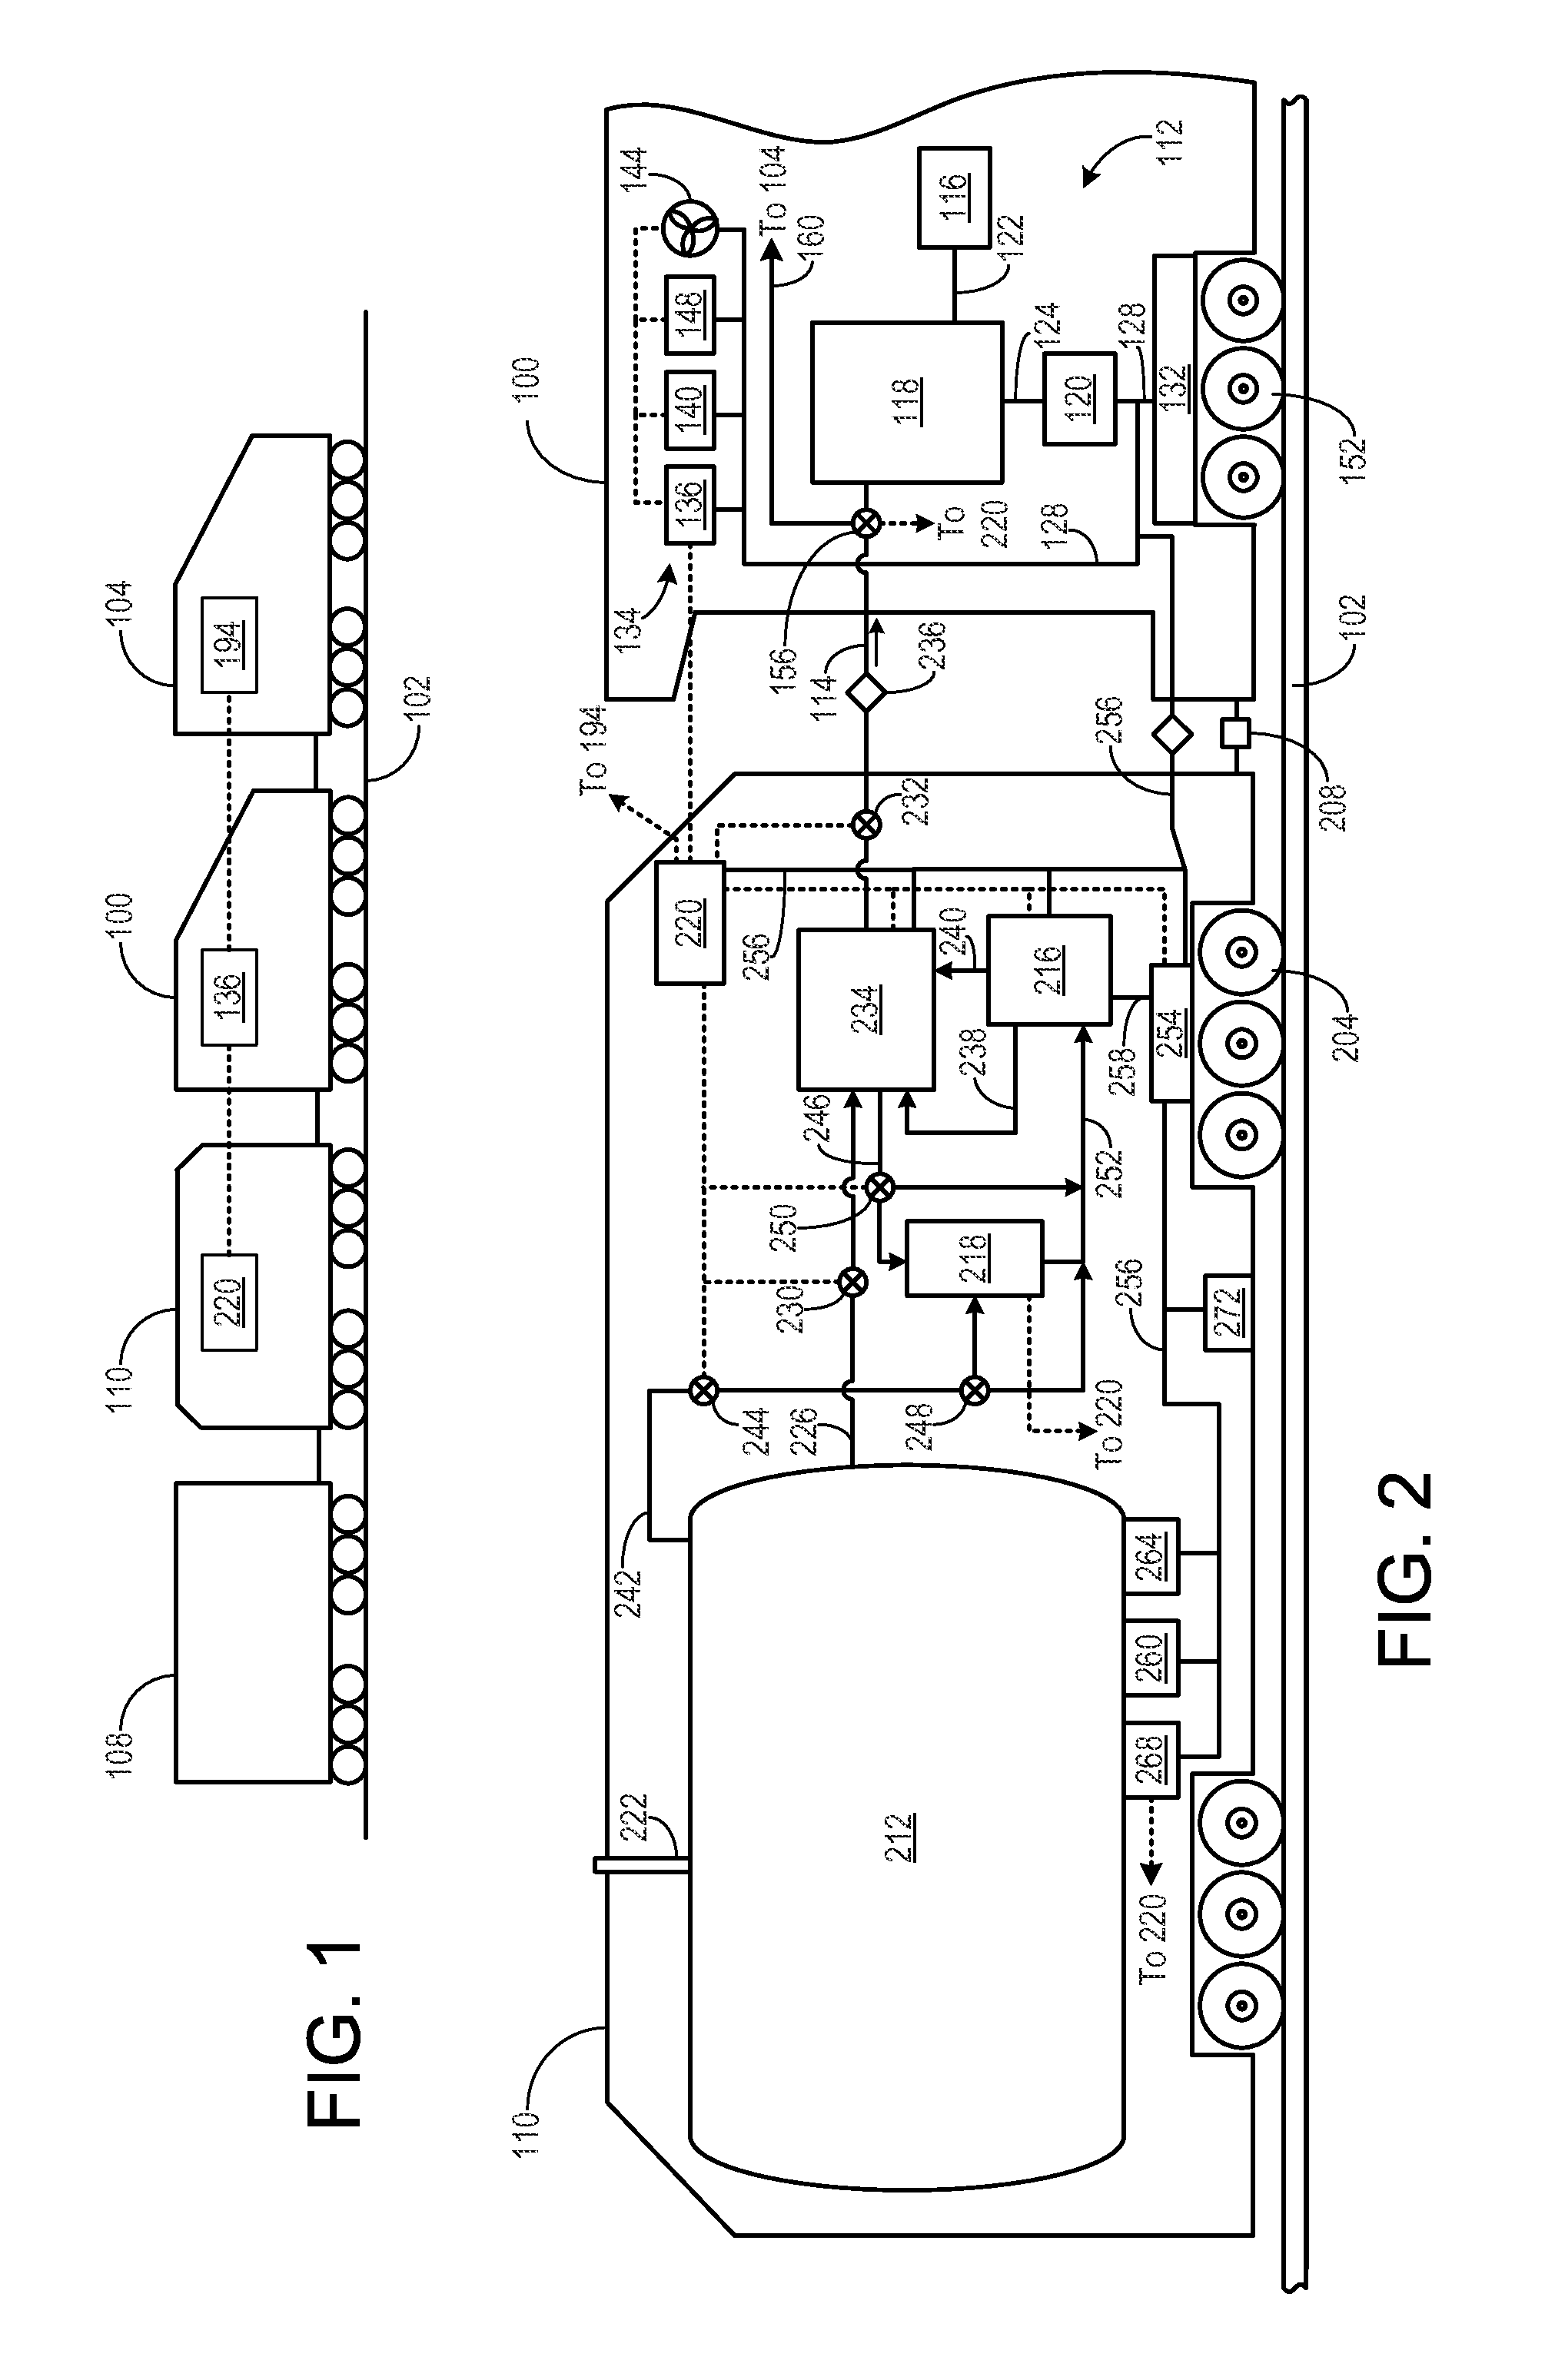 Methods and systems for powering a rail vehicle